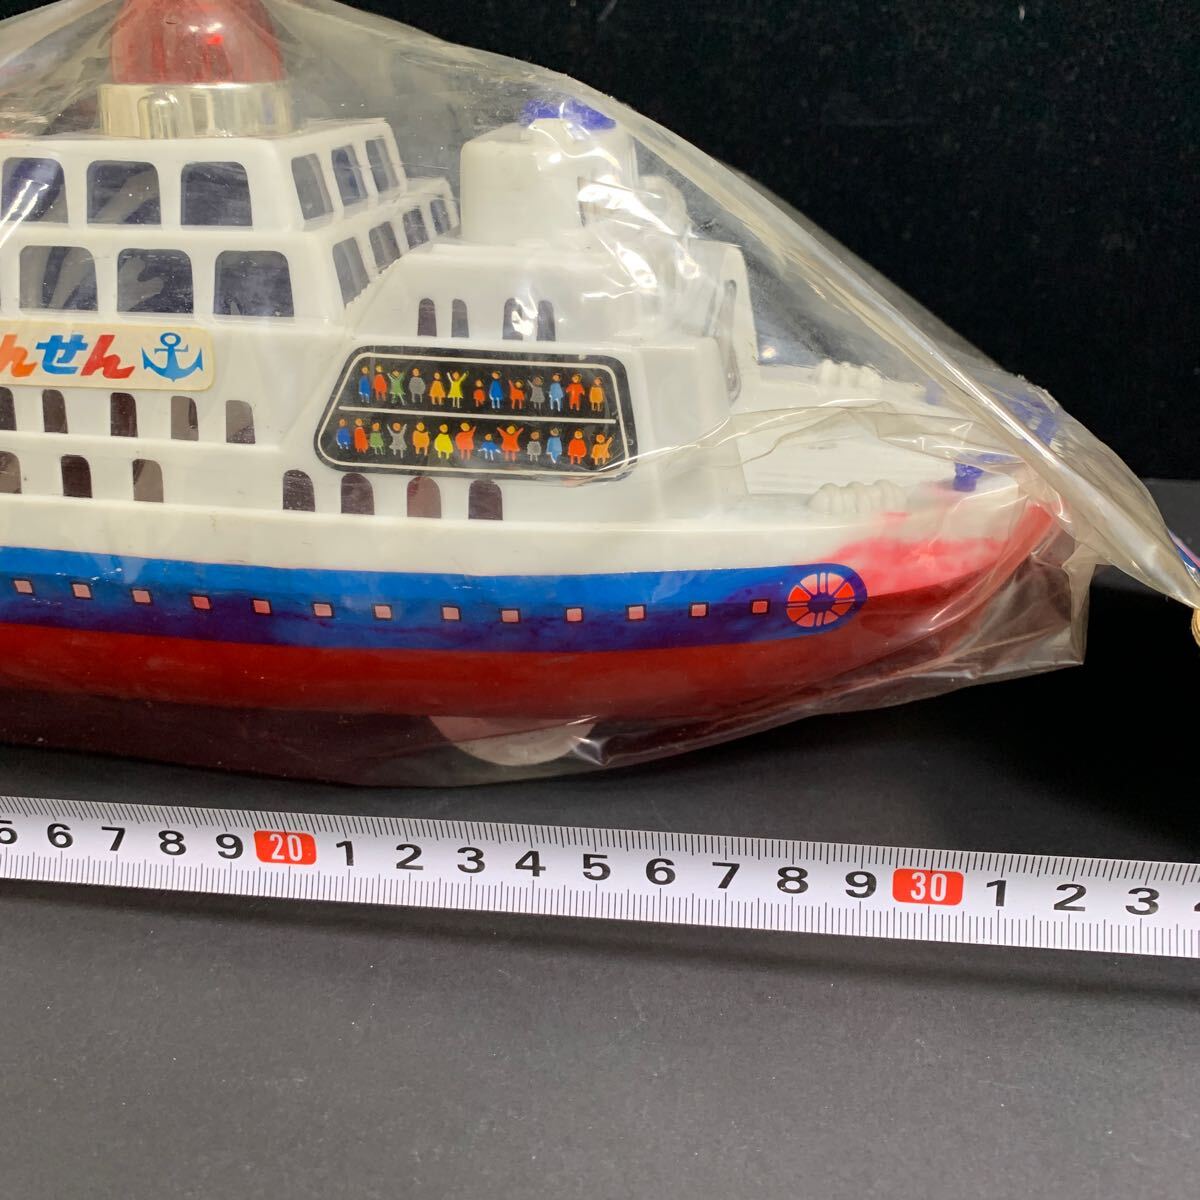  jumbo .... boat water land both for . viewing boat Showa Retro barcode equipped at that time mono toy toy omo tea unopened unused goods Manufacturers unknown that time thing 